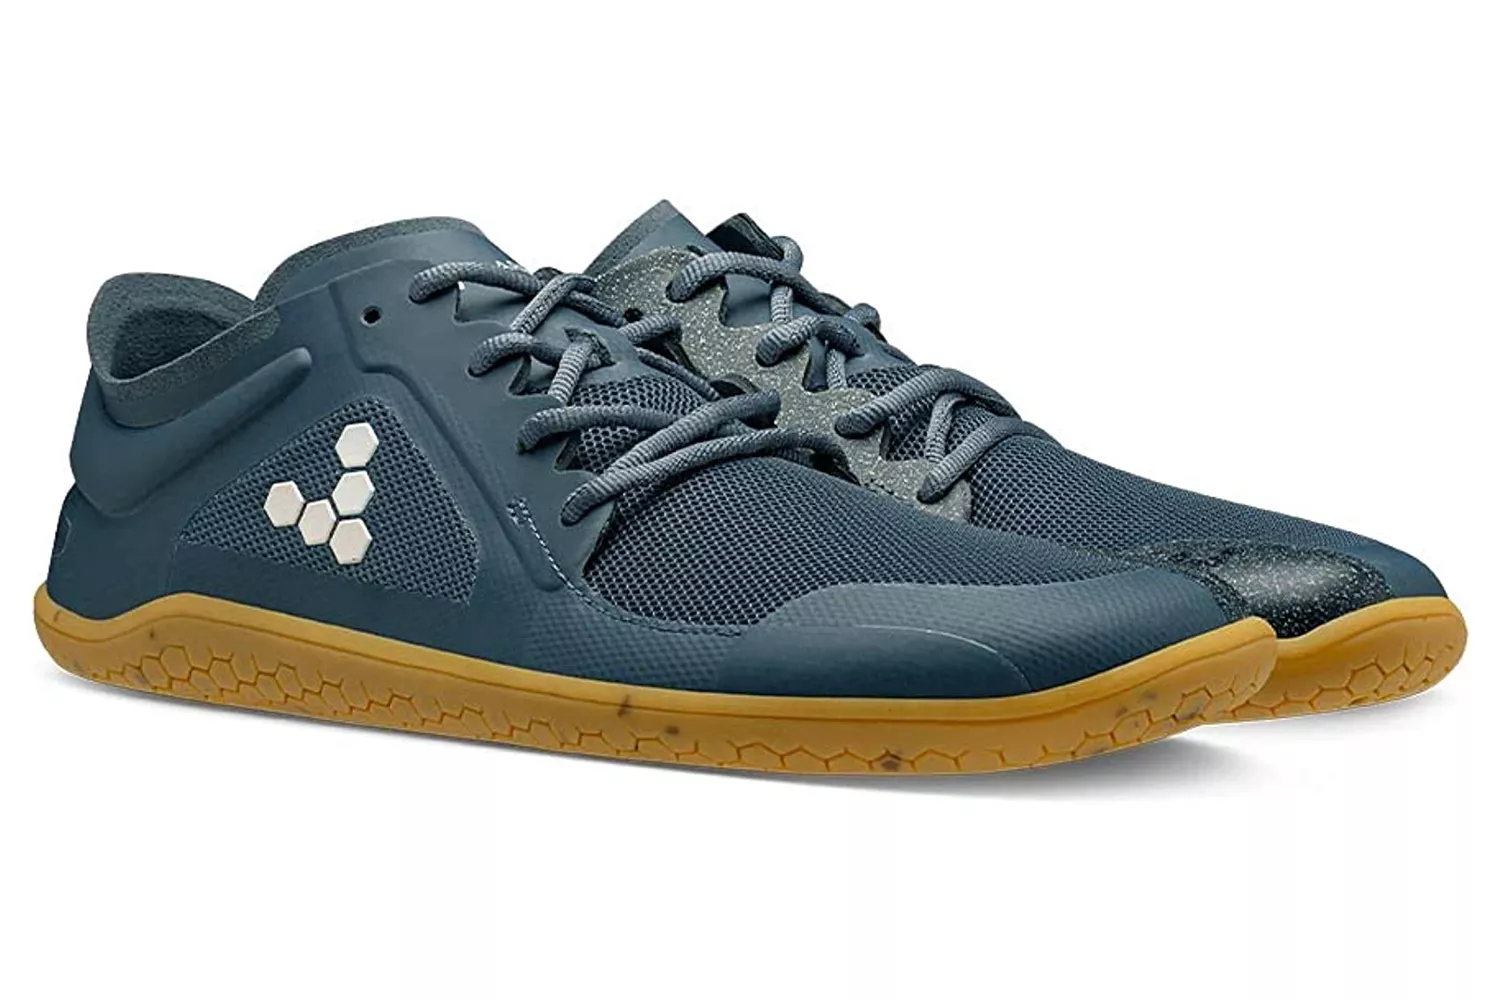 The Best Barefoot Shoes: Vivobarefoot Primus Lite III